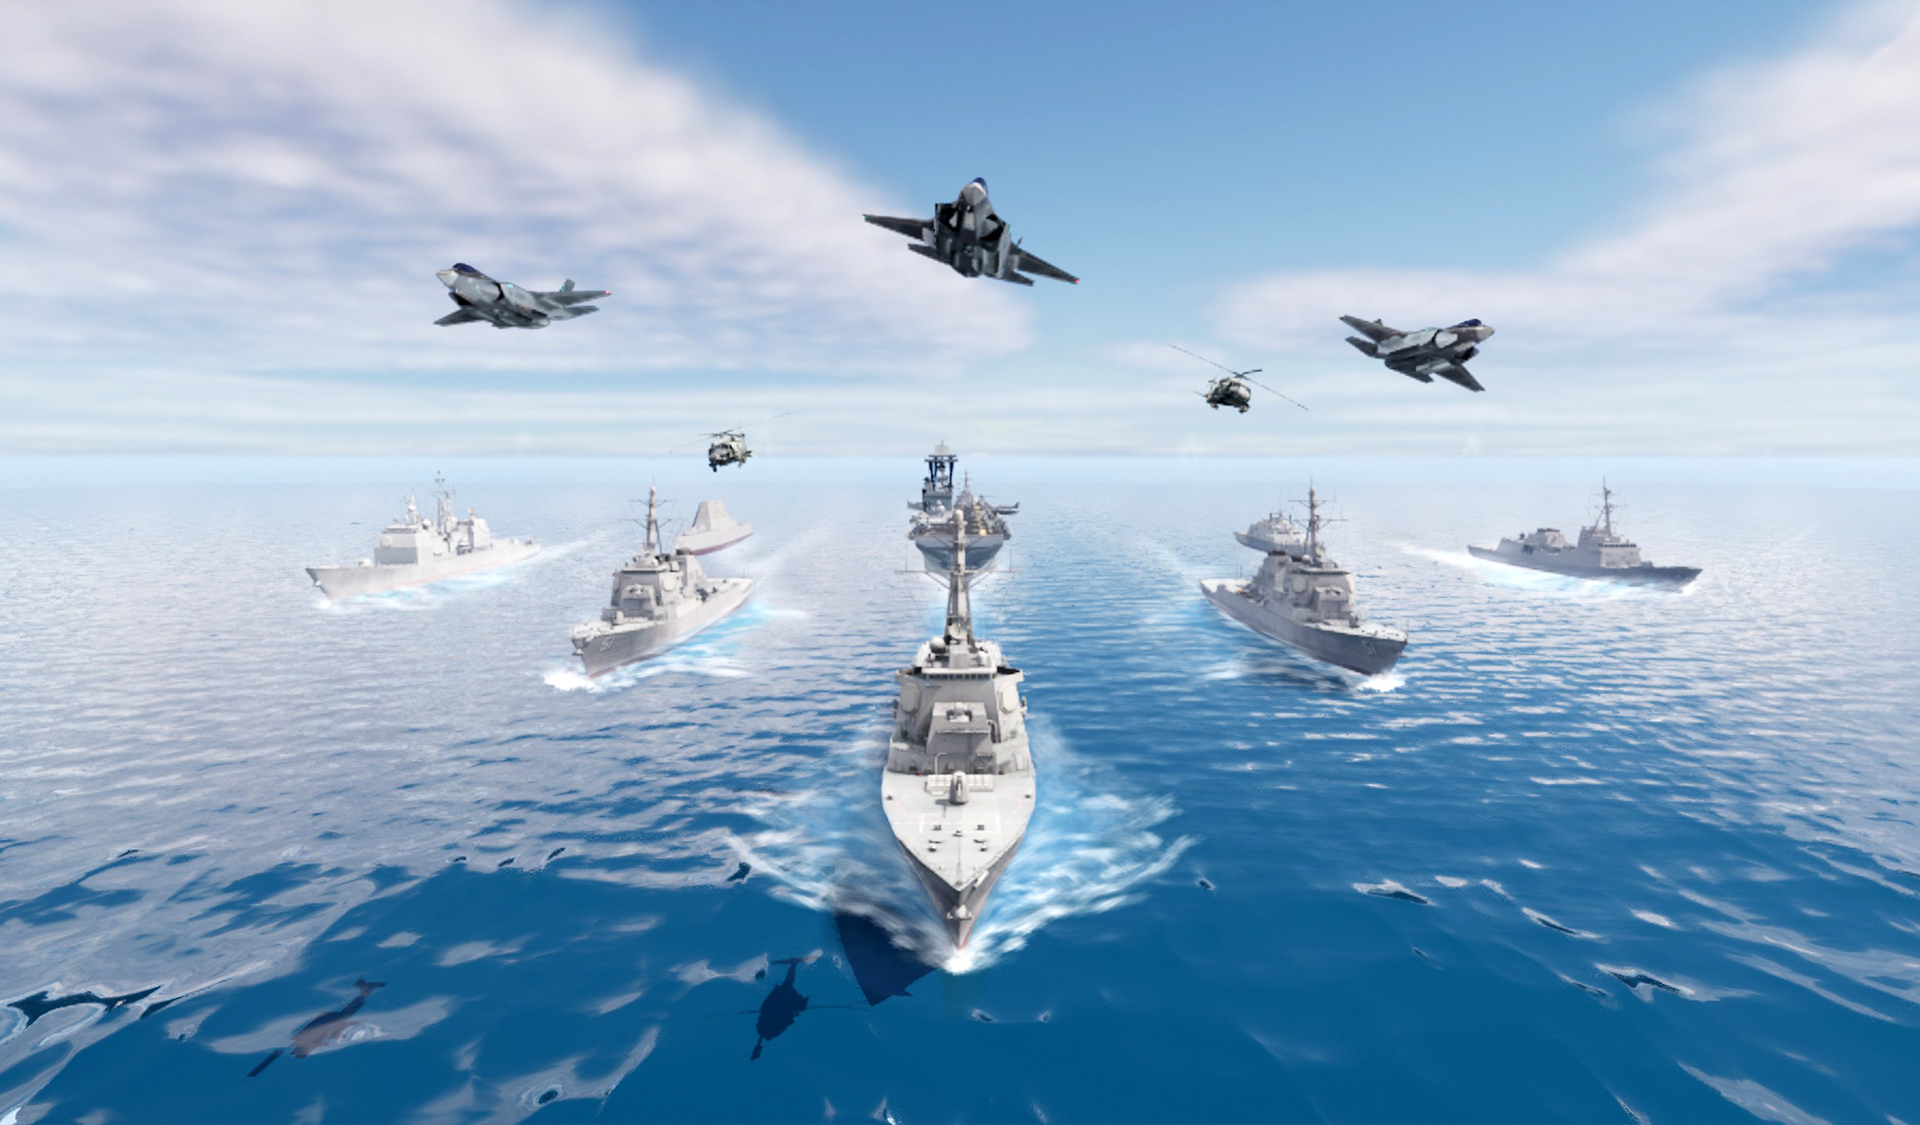 Lockheed Martin’s Integrated Combat System is a scalable combat management system for the U.S. Navy that uses common software and computer infrastructure to rapidly field capability across all domains to the surface fleet. Rendering: Lockheed Martin.